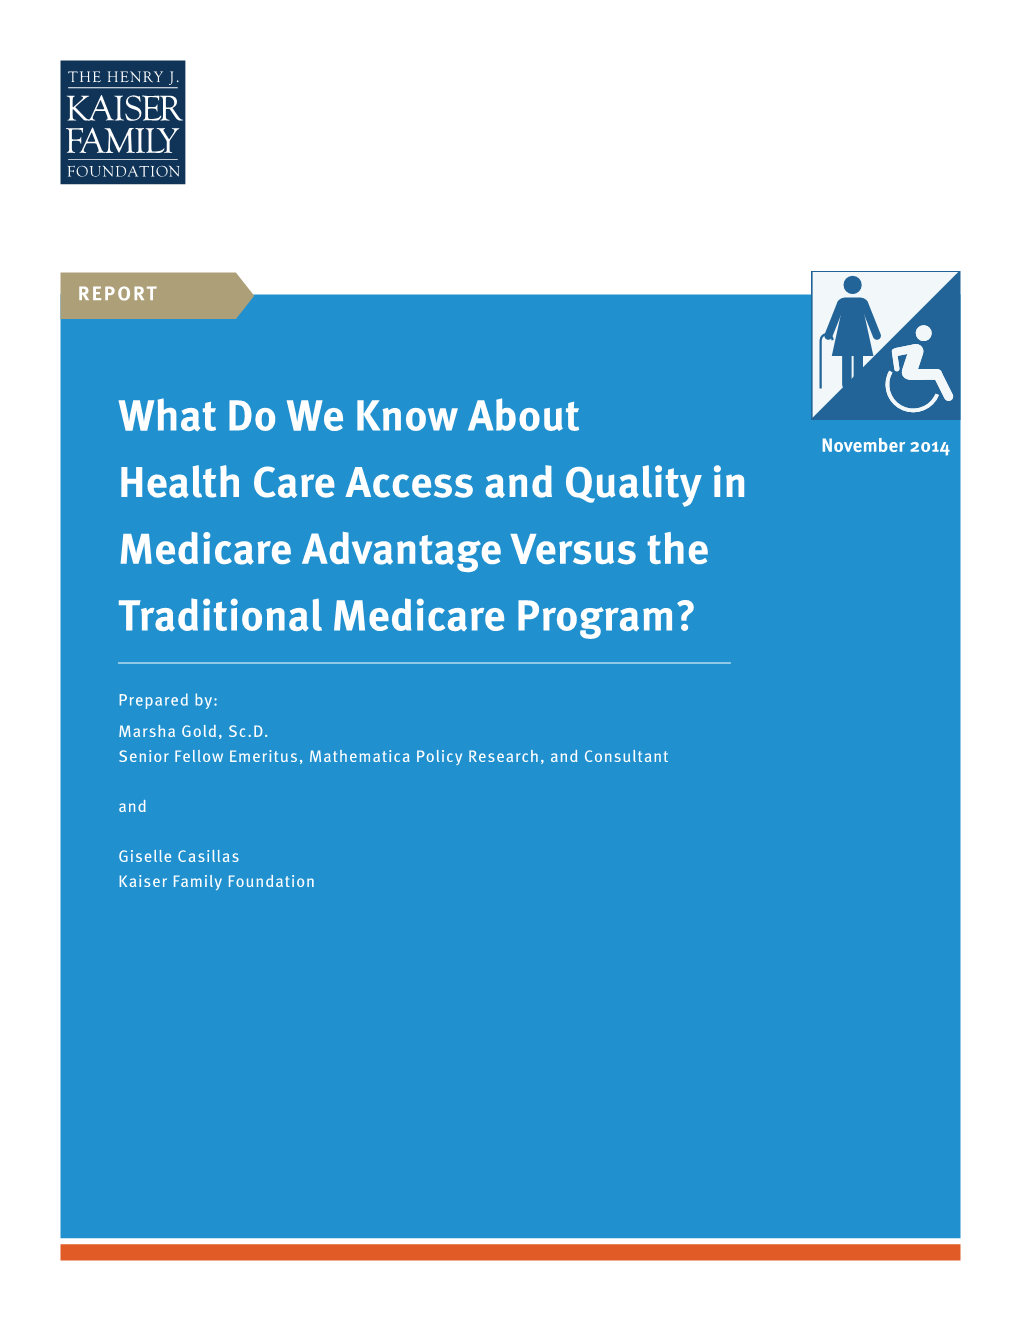 What Do We Know About Health Care Access and Quality in Medicare